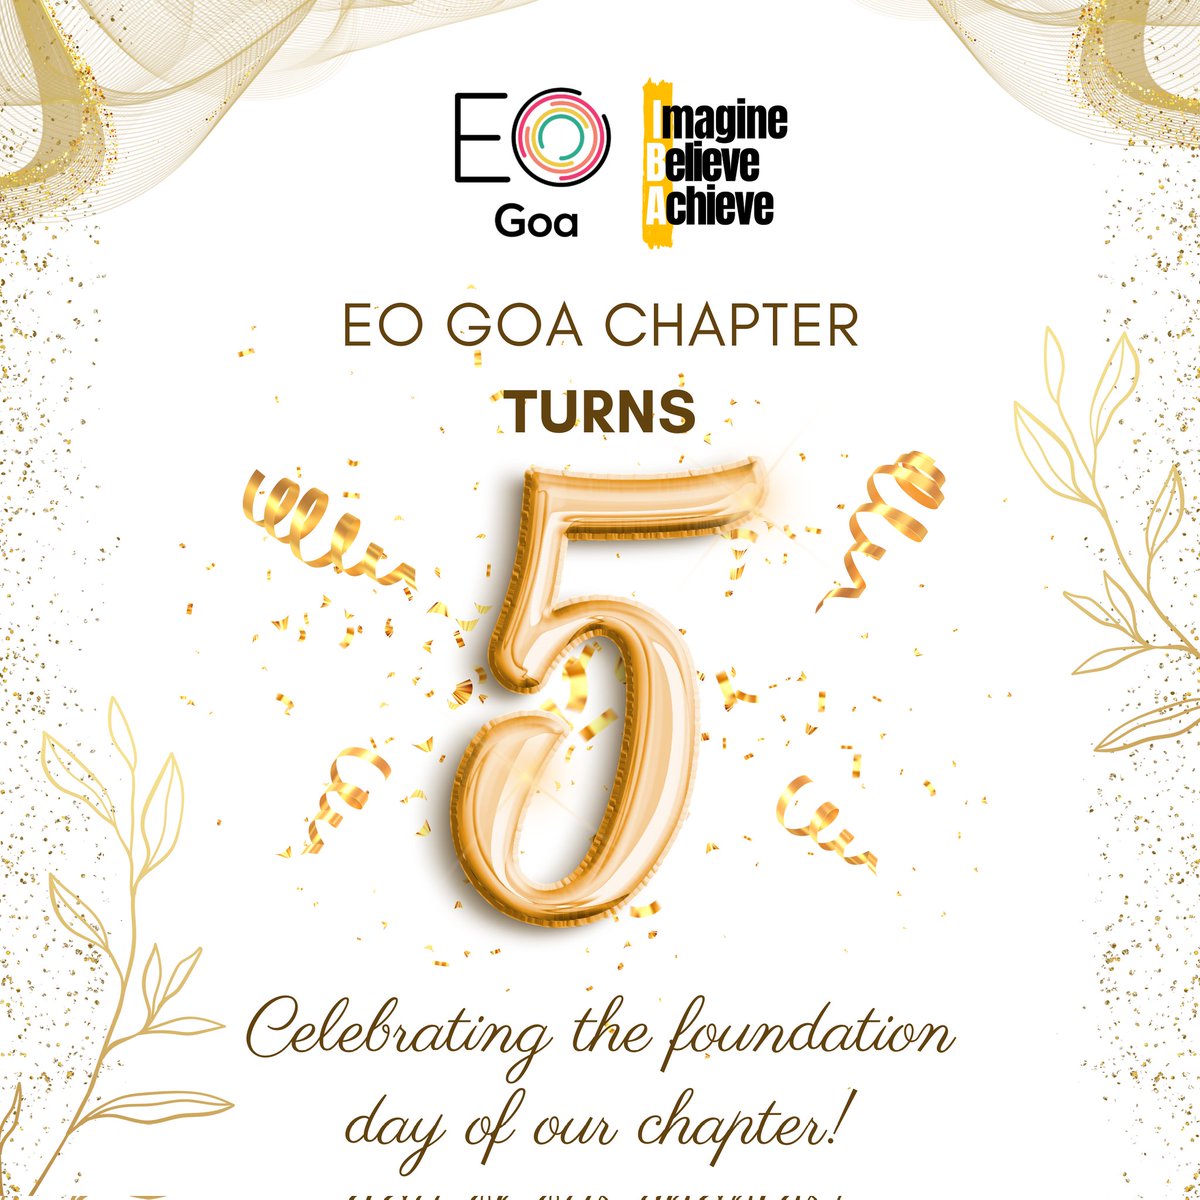 HIP, HIP, HURRAY! 🎉✨
The #EOGoaChapter was founded on this day, on 4th May 2018. It has been a wonderful journey of FIVE amazing years, and we look forward to many more years to come ahead!

Cheers to the entire #EOGoaFamily! 🥂

#ImagineBelieveAchieve #EOGoa